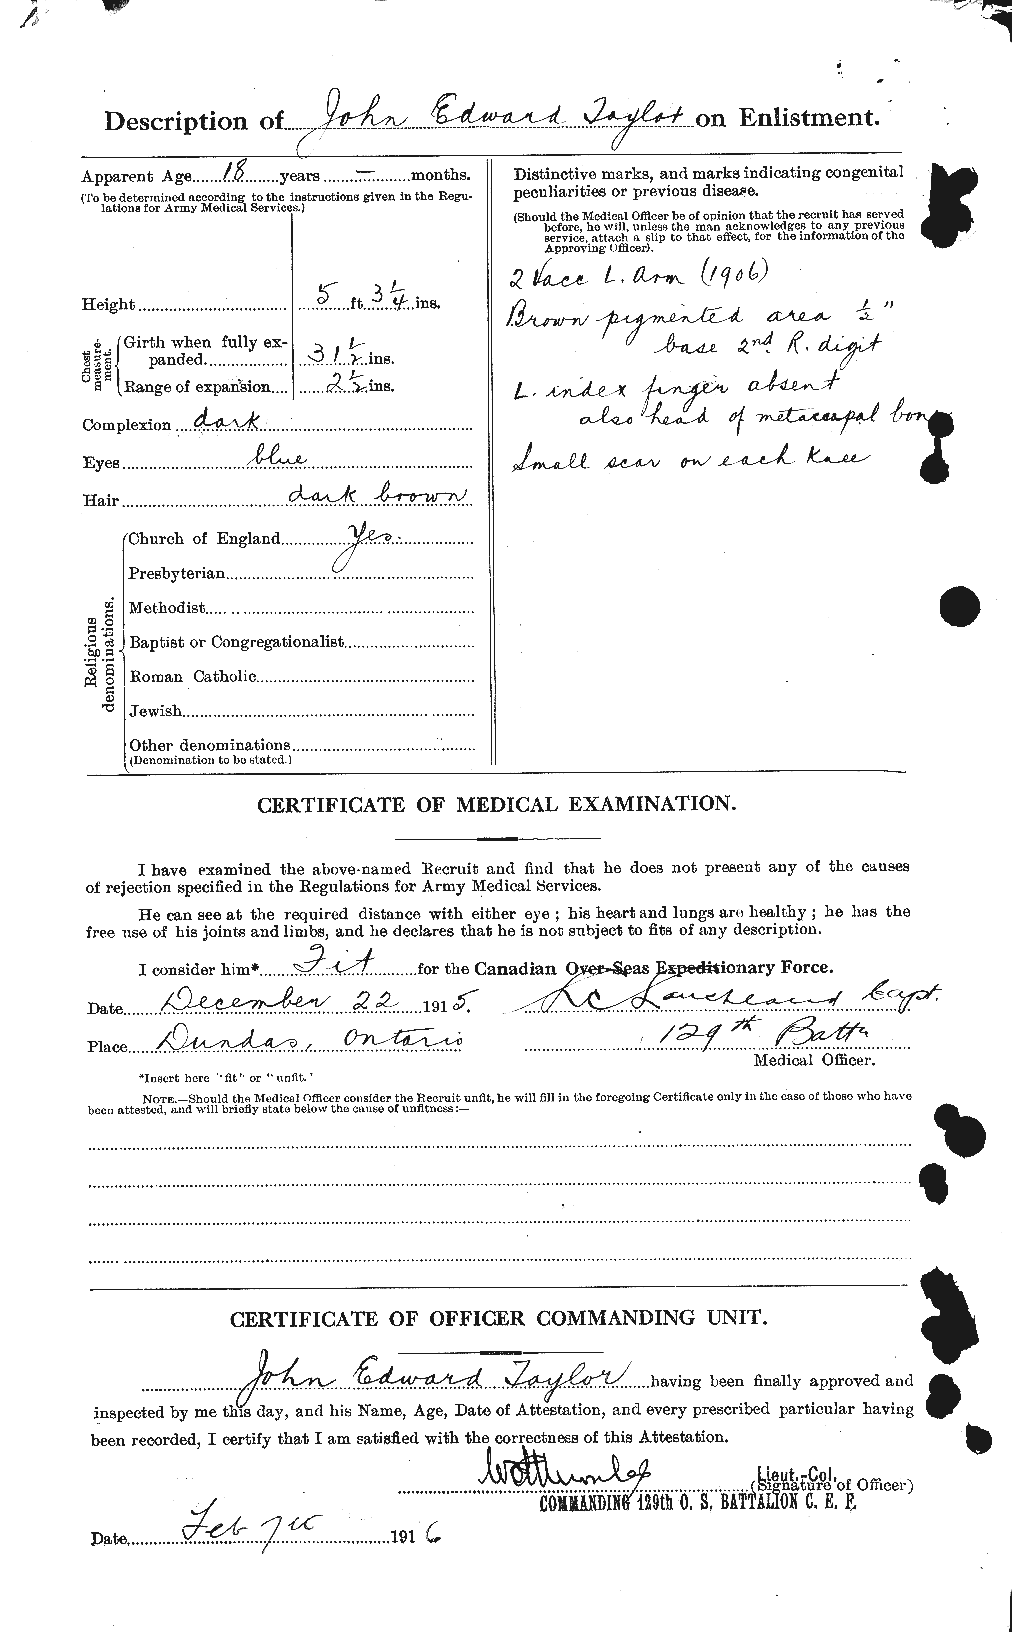 Personnel Records of the First World War - CEF 627077b